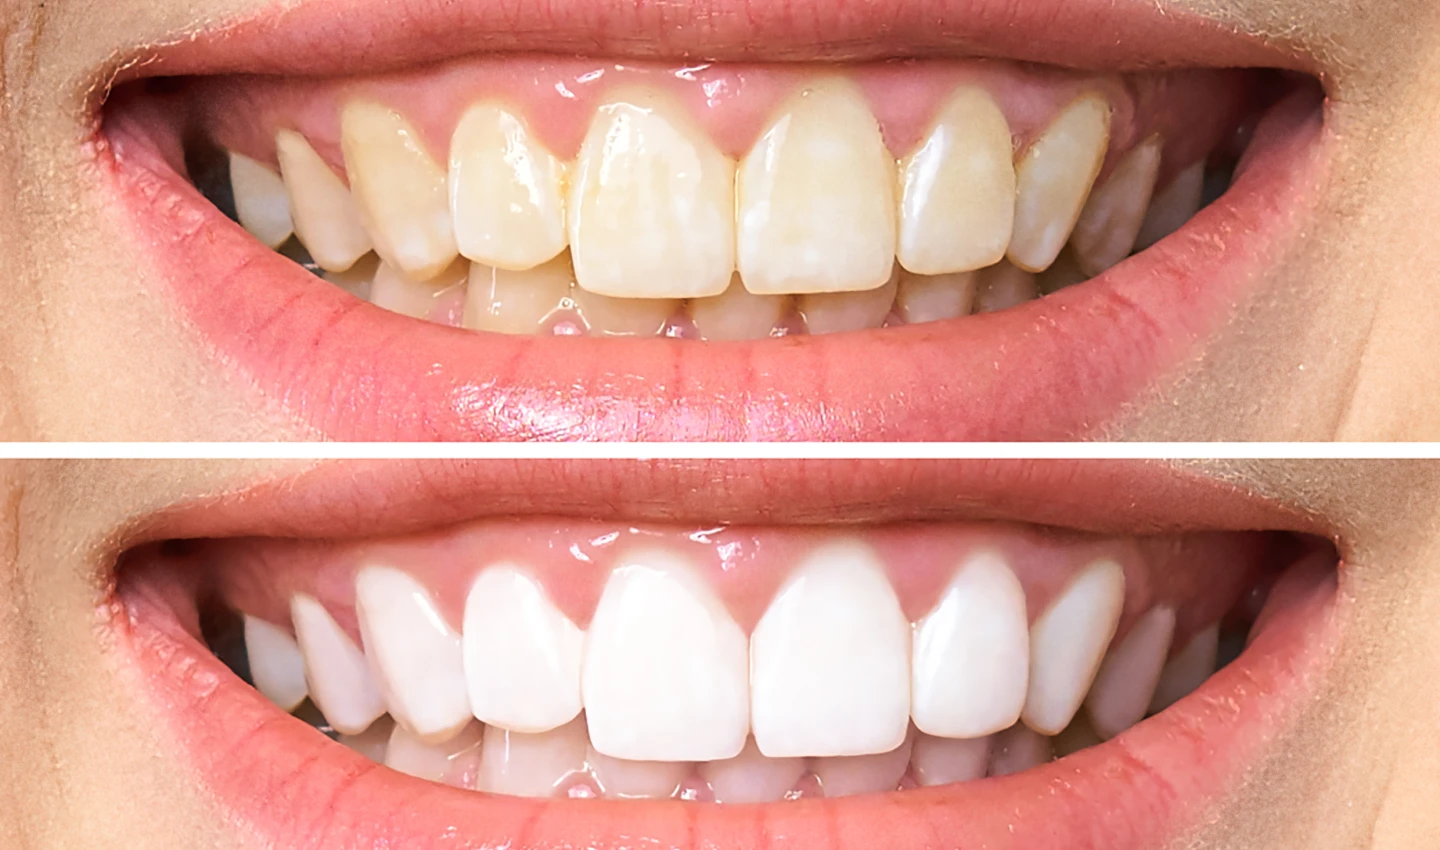 Close-up Smile Makeover Photos showing Before and After Cosmetic Dentistry - a woman's mouth with chipped, yellow teeth transformed into a bright, beautiful smile through cosmetic dental surgery.